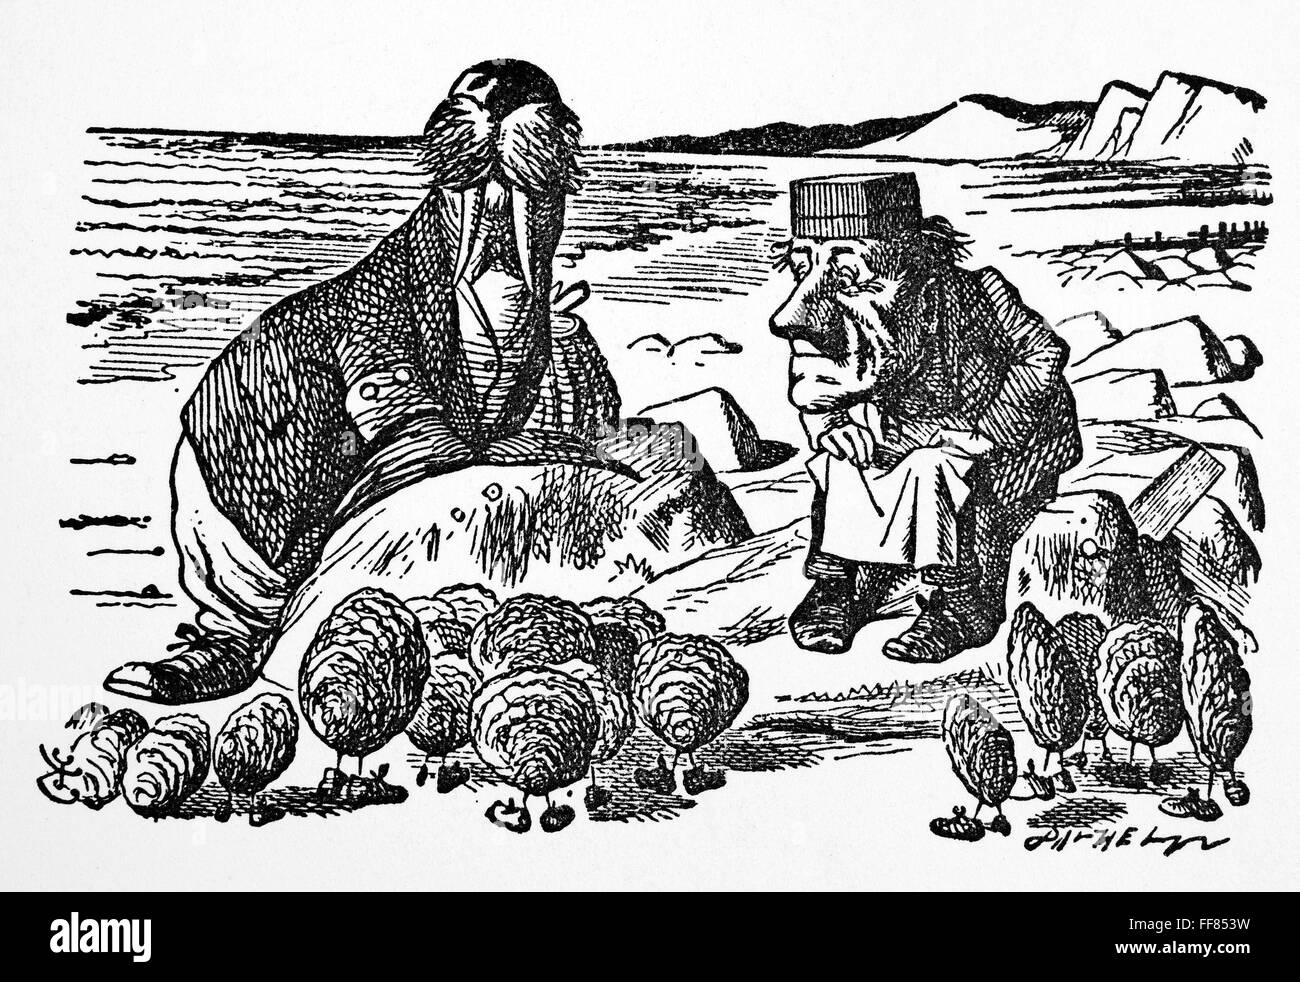 CARROLL: LOOKING GLASS. /nThe Walrus, the Carpenter, and the Oysters. Illustration by Sir John Tenniel to the first edition of Lewis Carroll's 'Through the Looking Glass,' 1872. Stock Photo